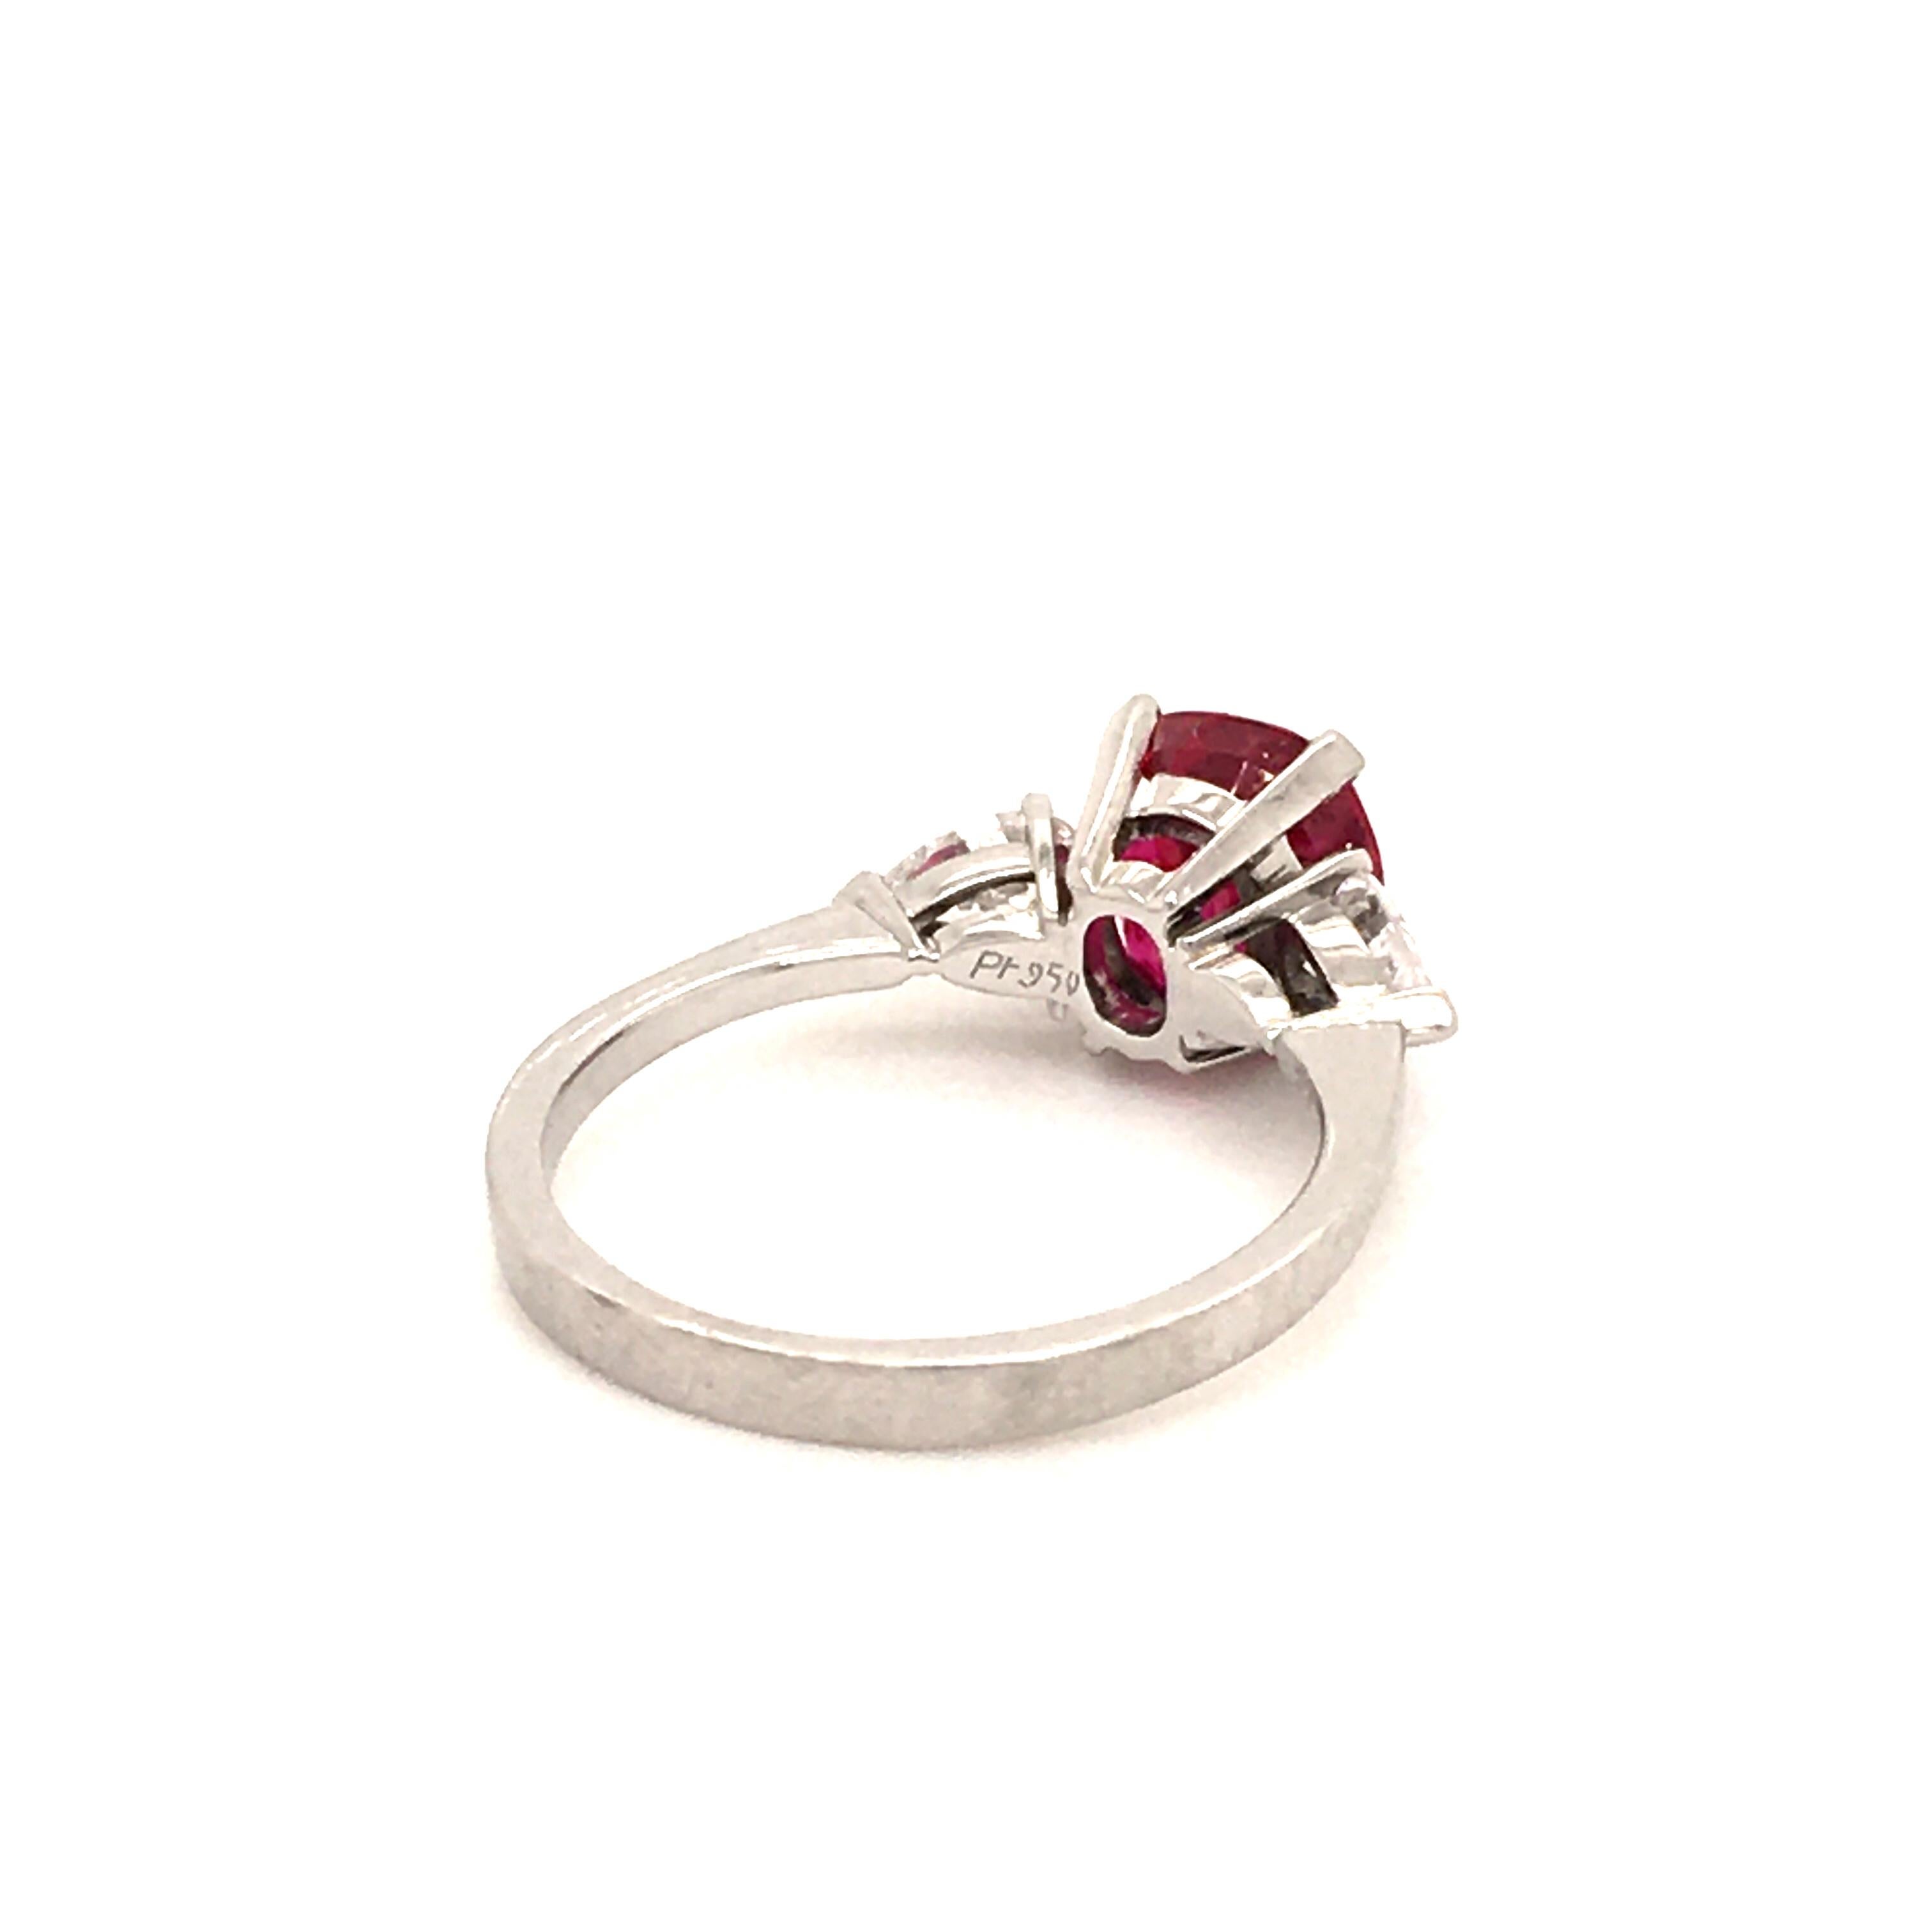 Superb Gubelin Ring with a 2.35 Carat Untreated Burmese Ruby and Diamonds 4